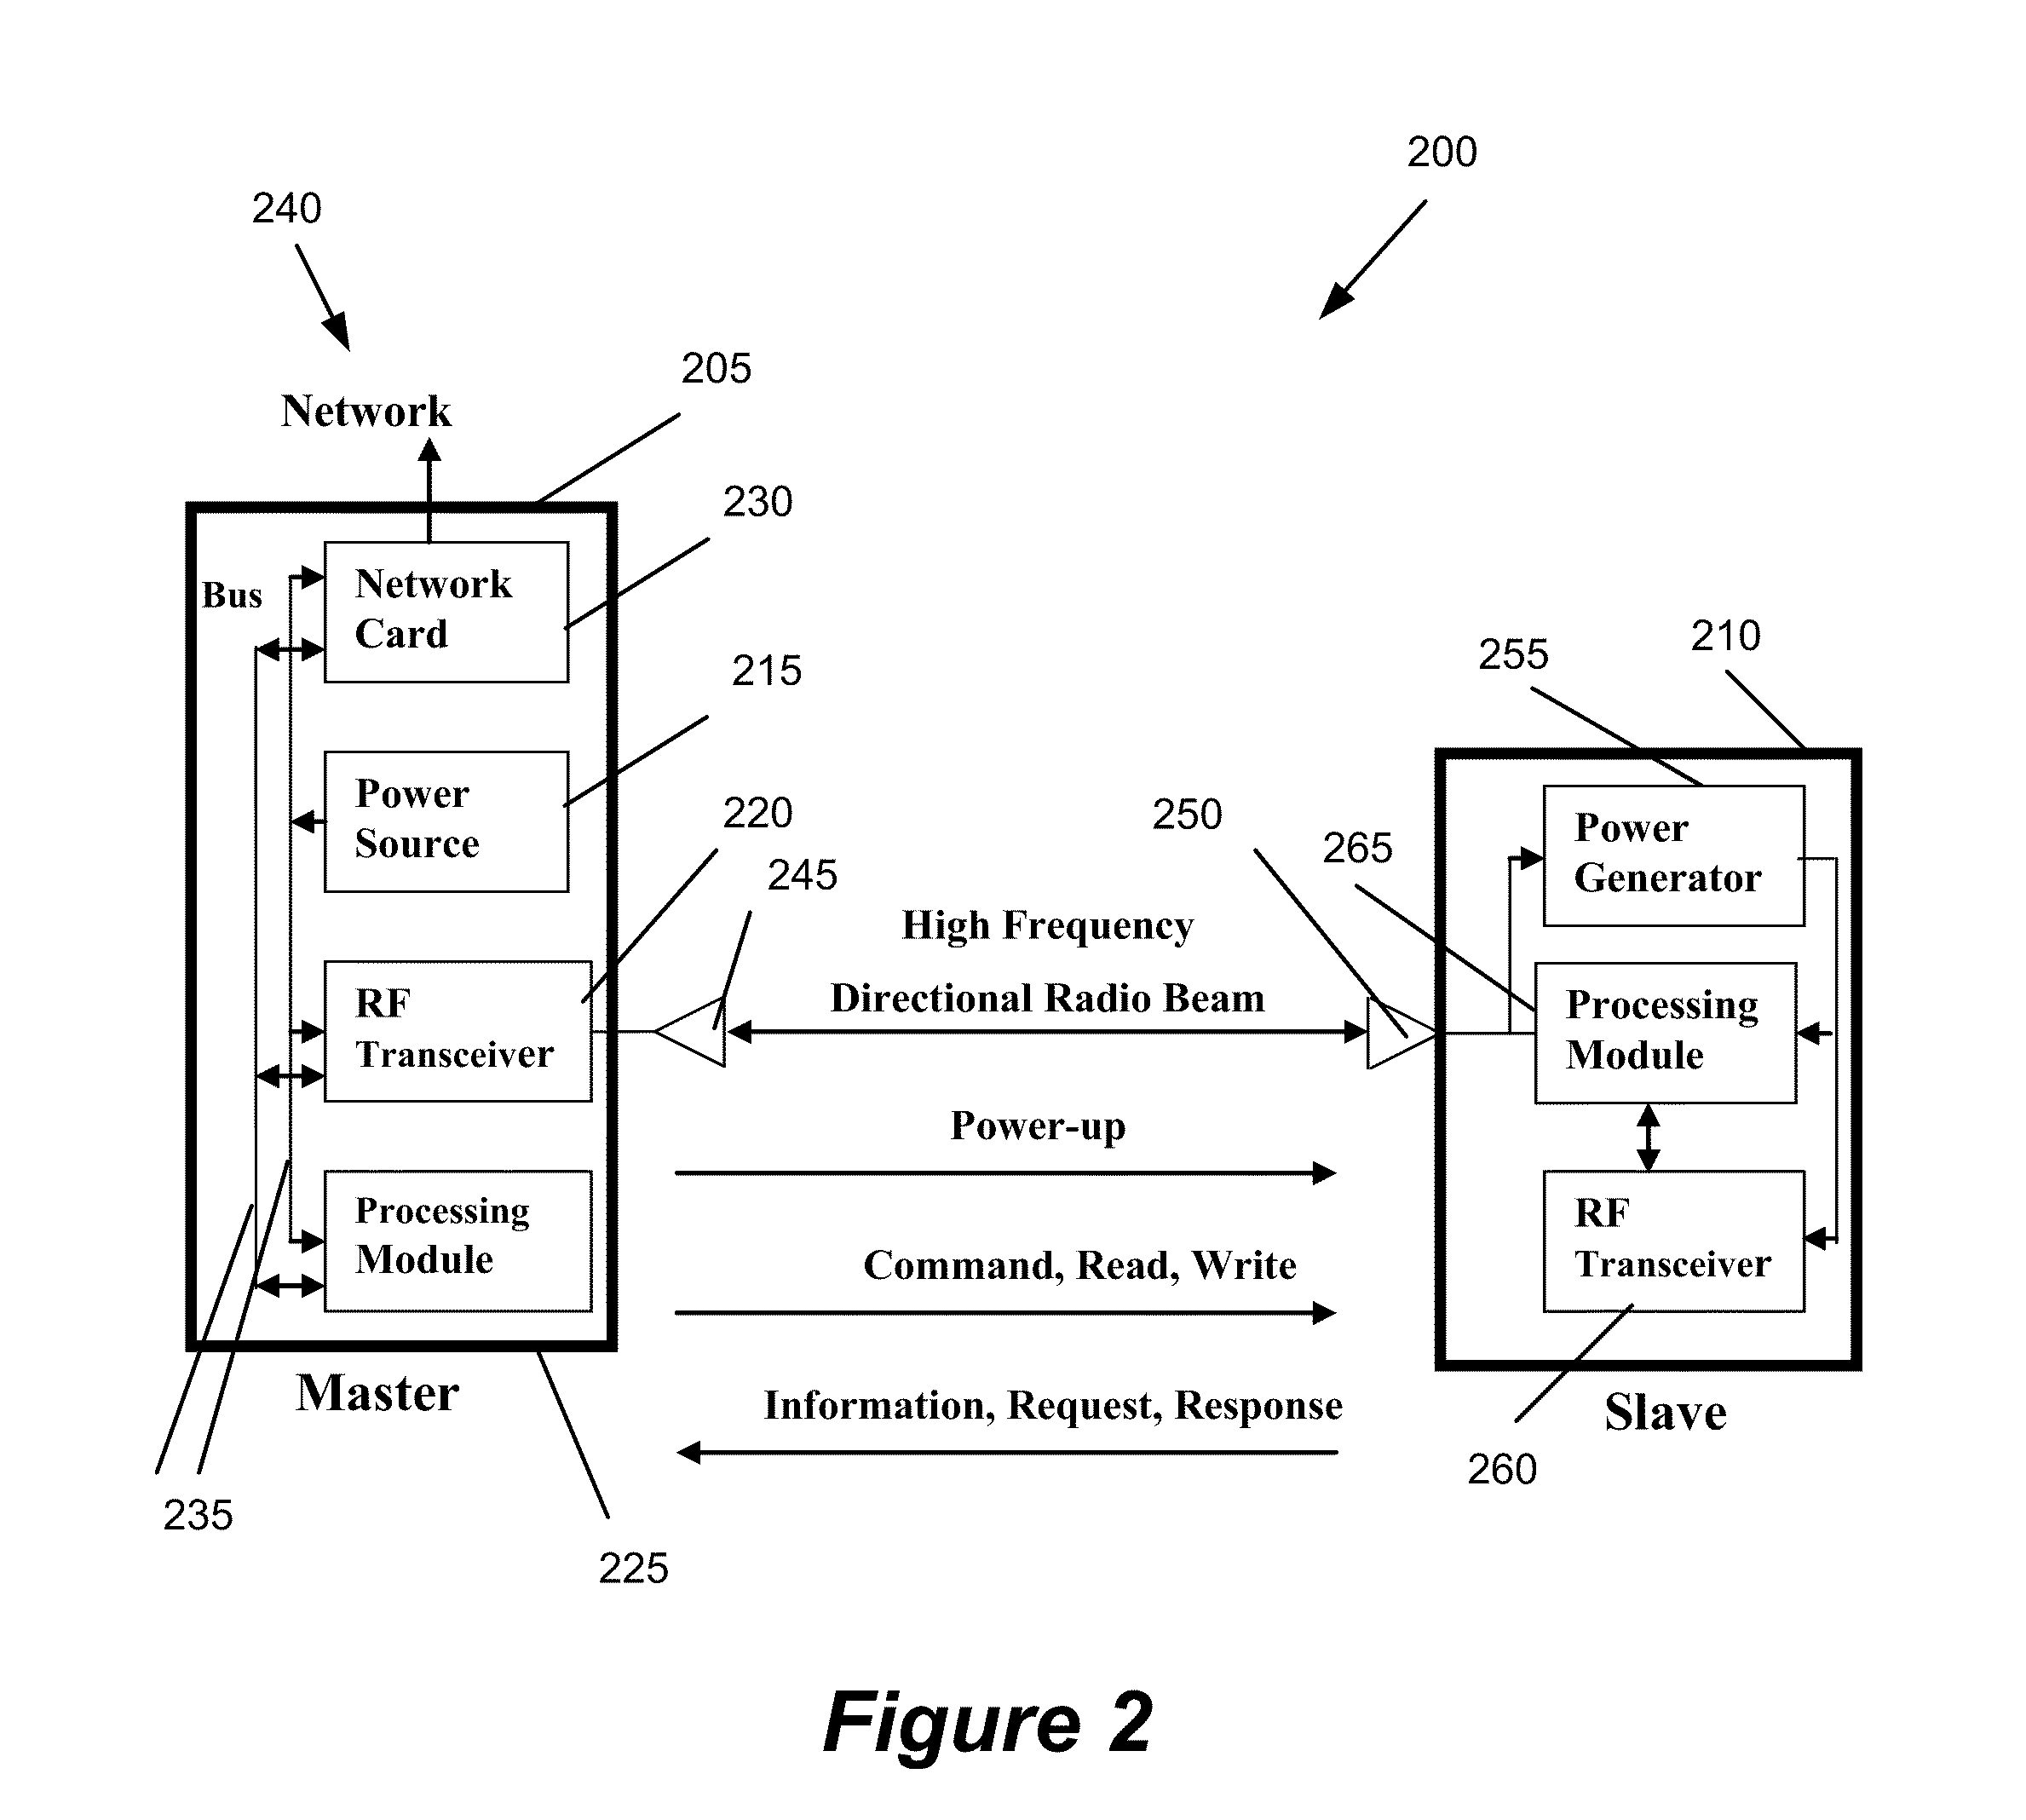 Method and apparatus for wirelessly transferring power and communicating with one or more slave devices